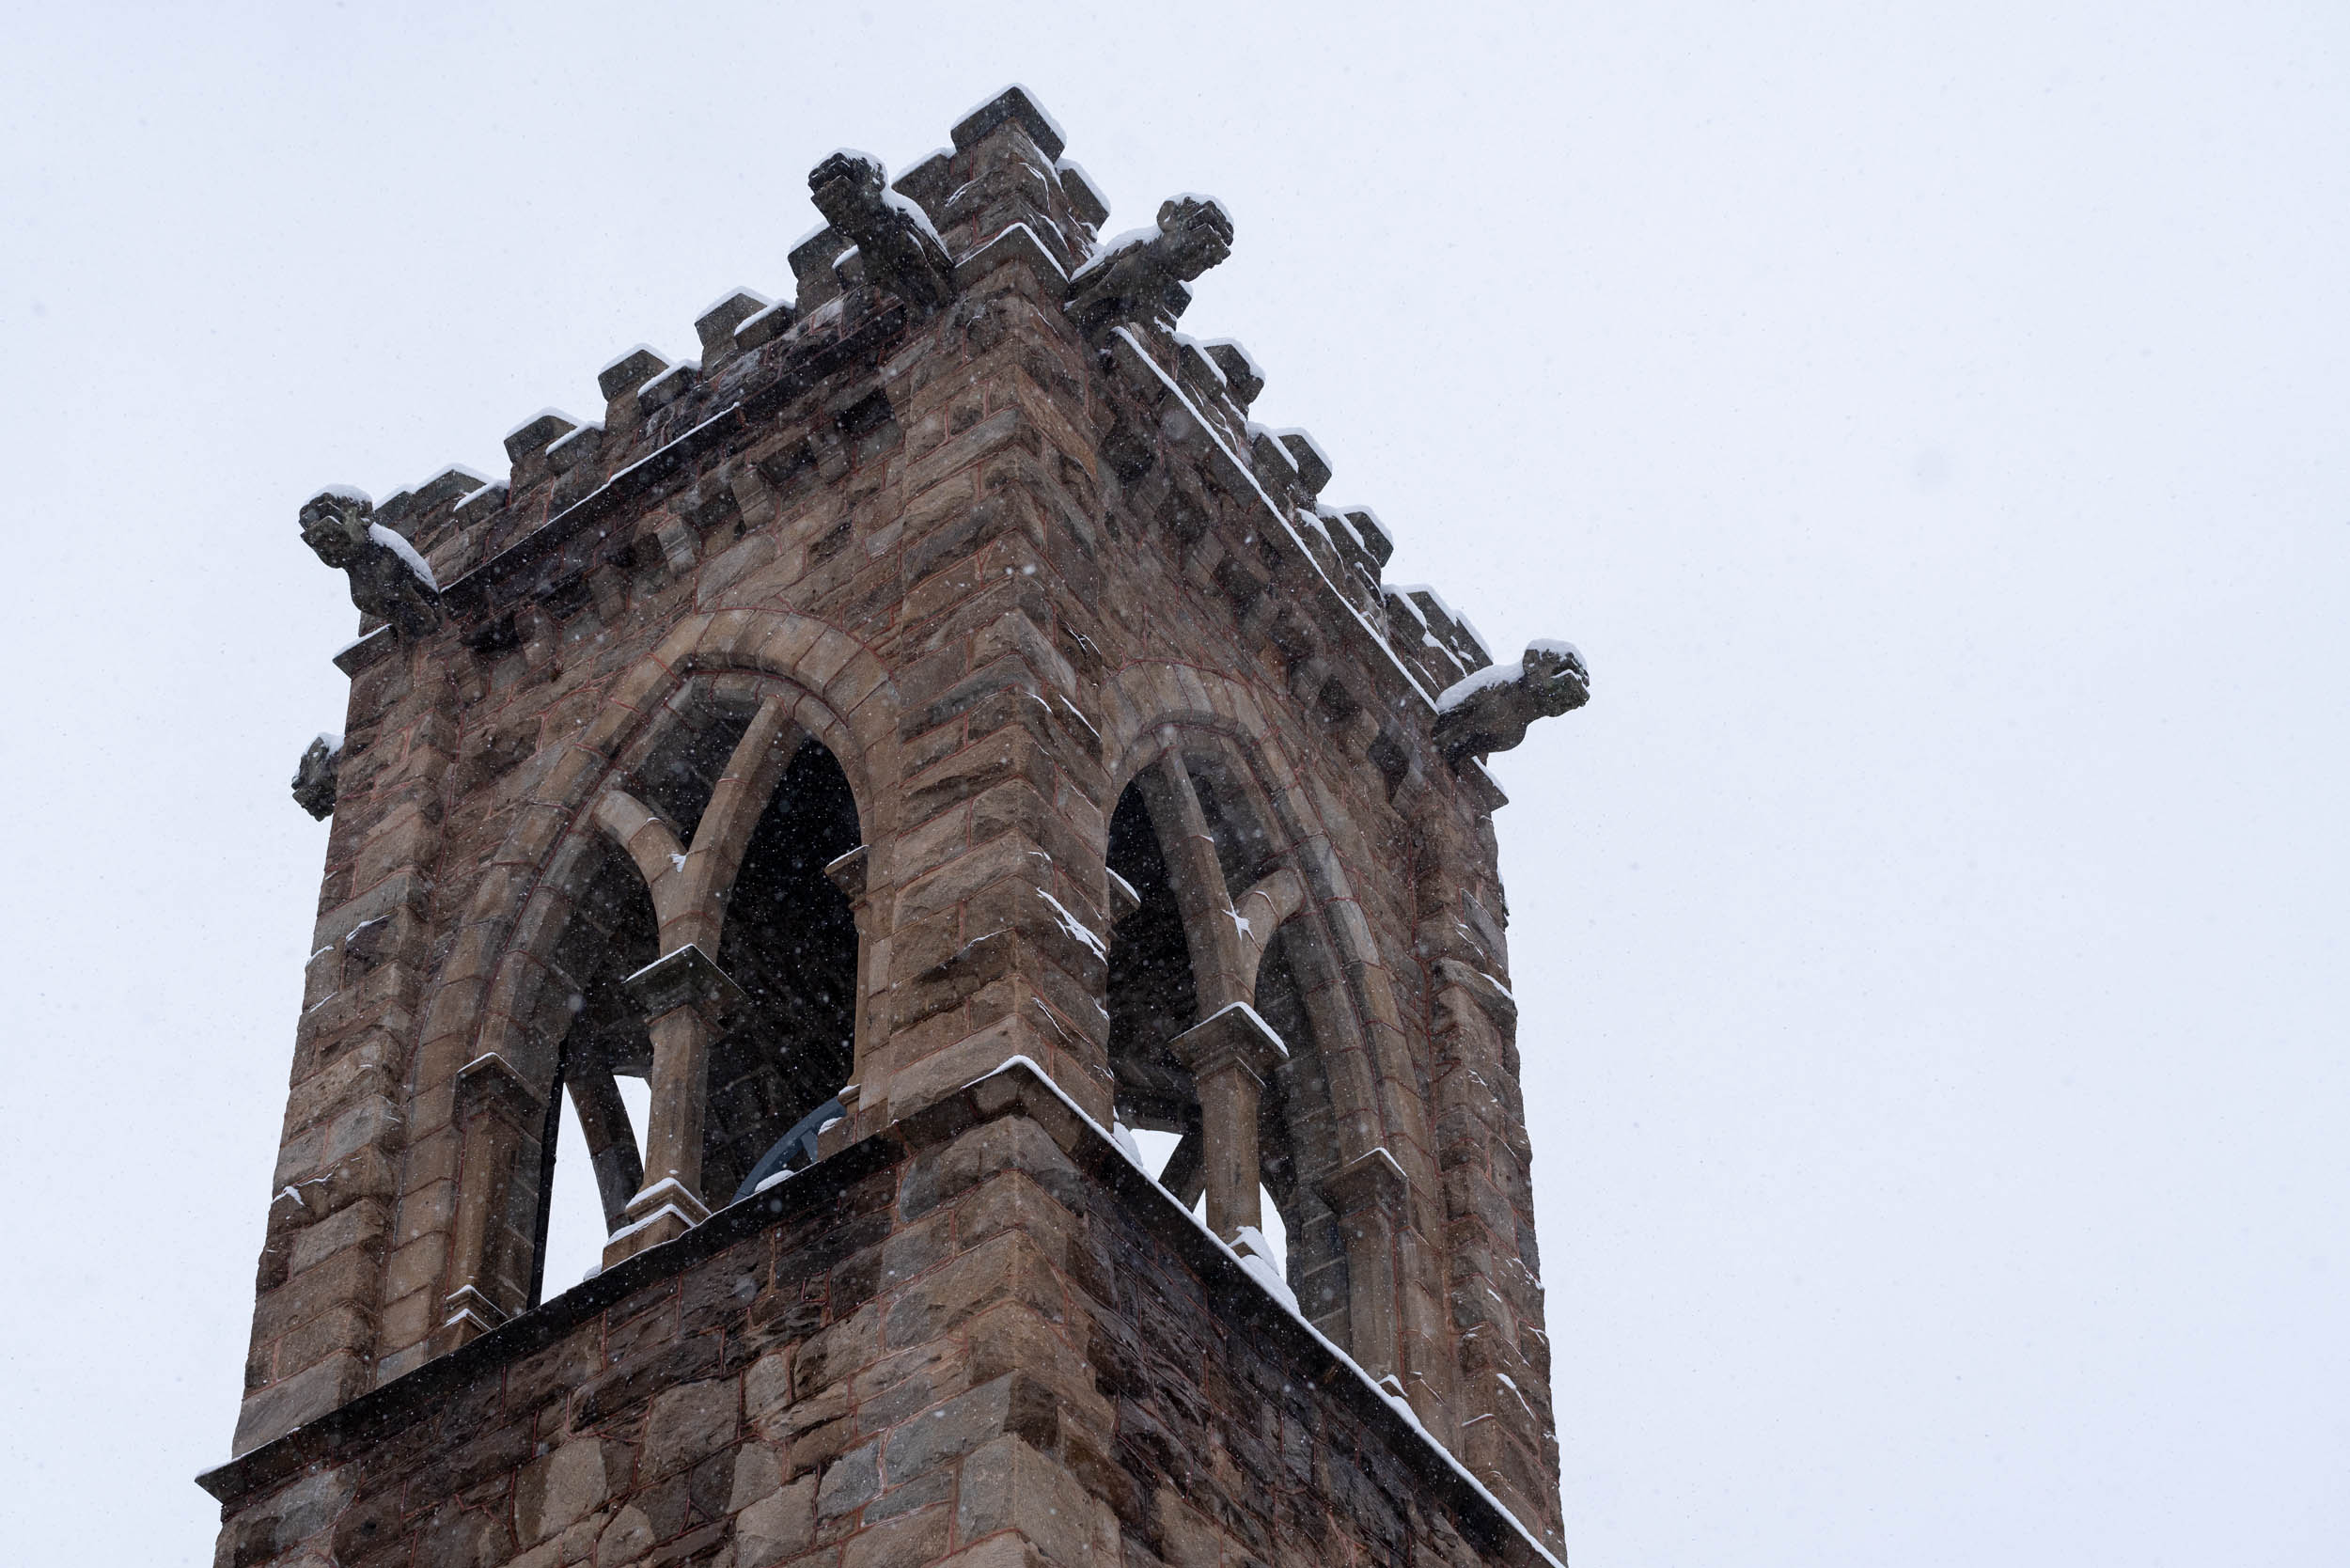 Snow falling on the chapel bell tower